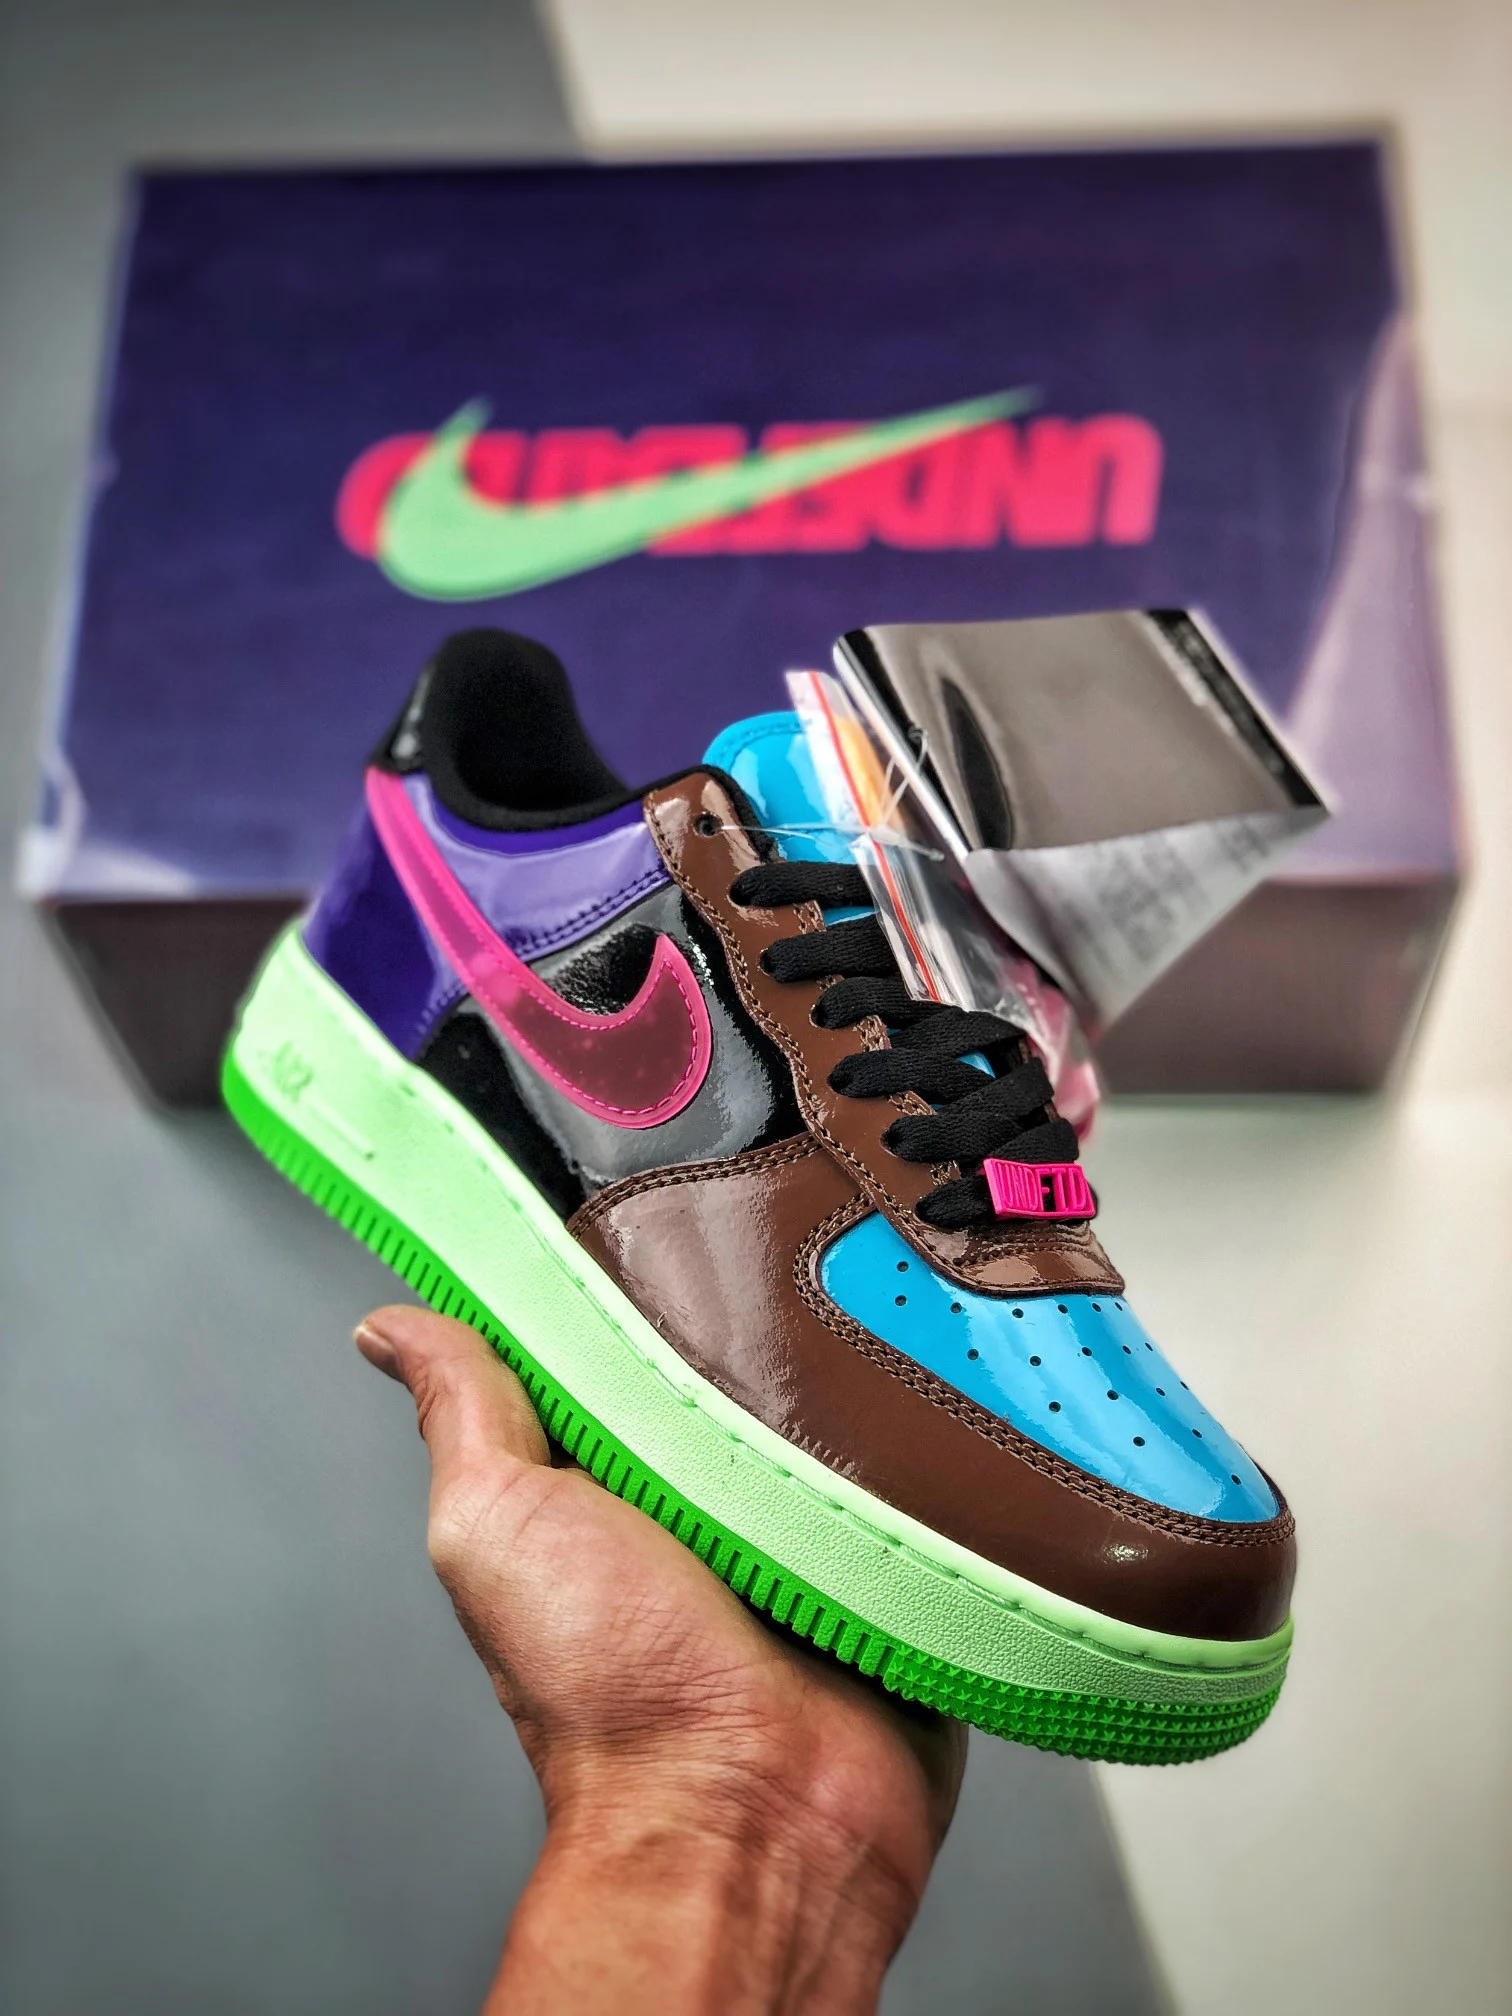 Undefeated x Nike Air Force 1 Low Pink Prime DV5255-200 For Sale